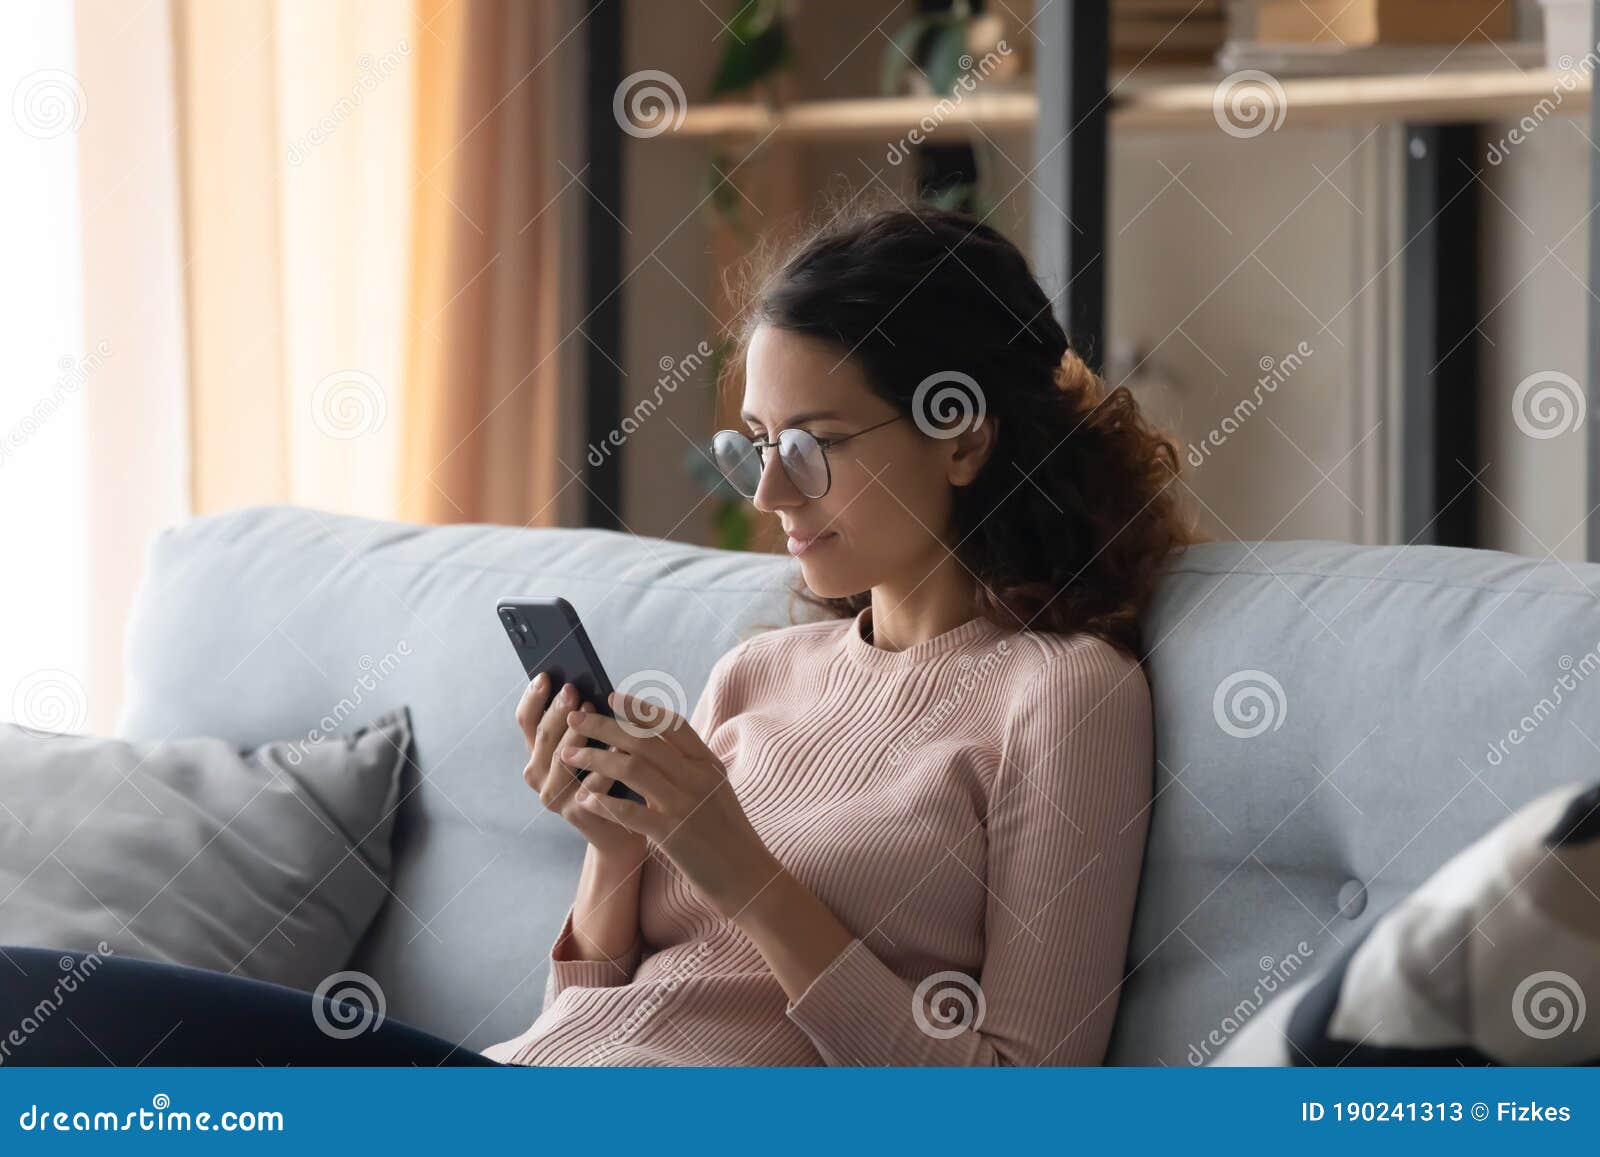 caucasian woman in glasses using cellphone at home